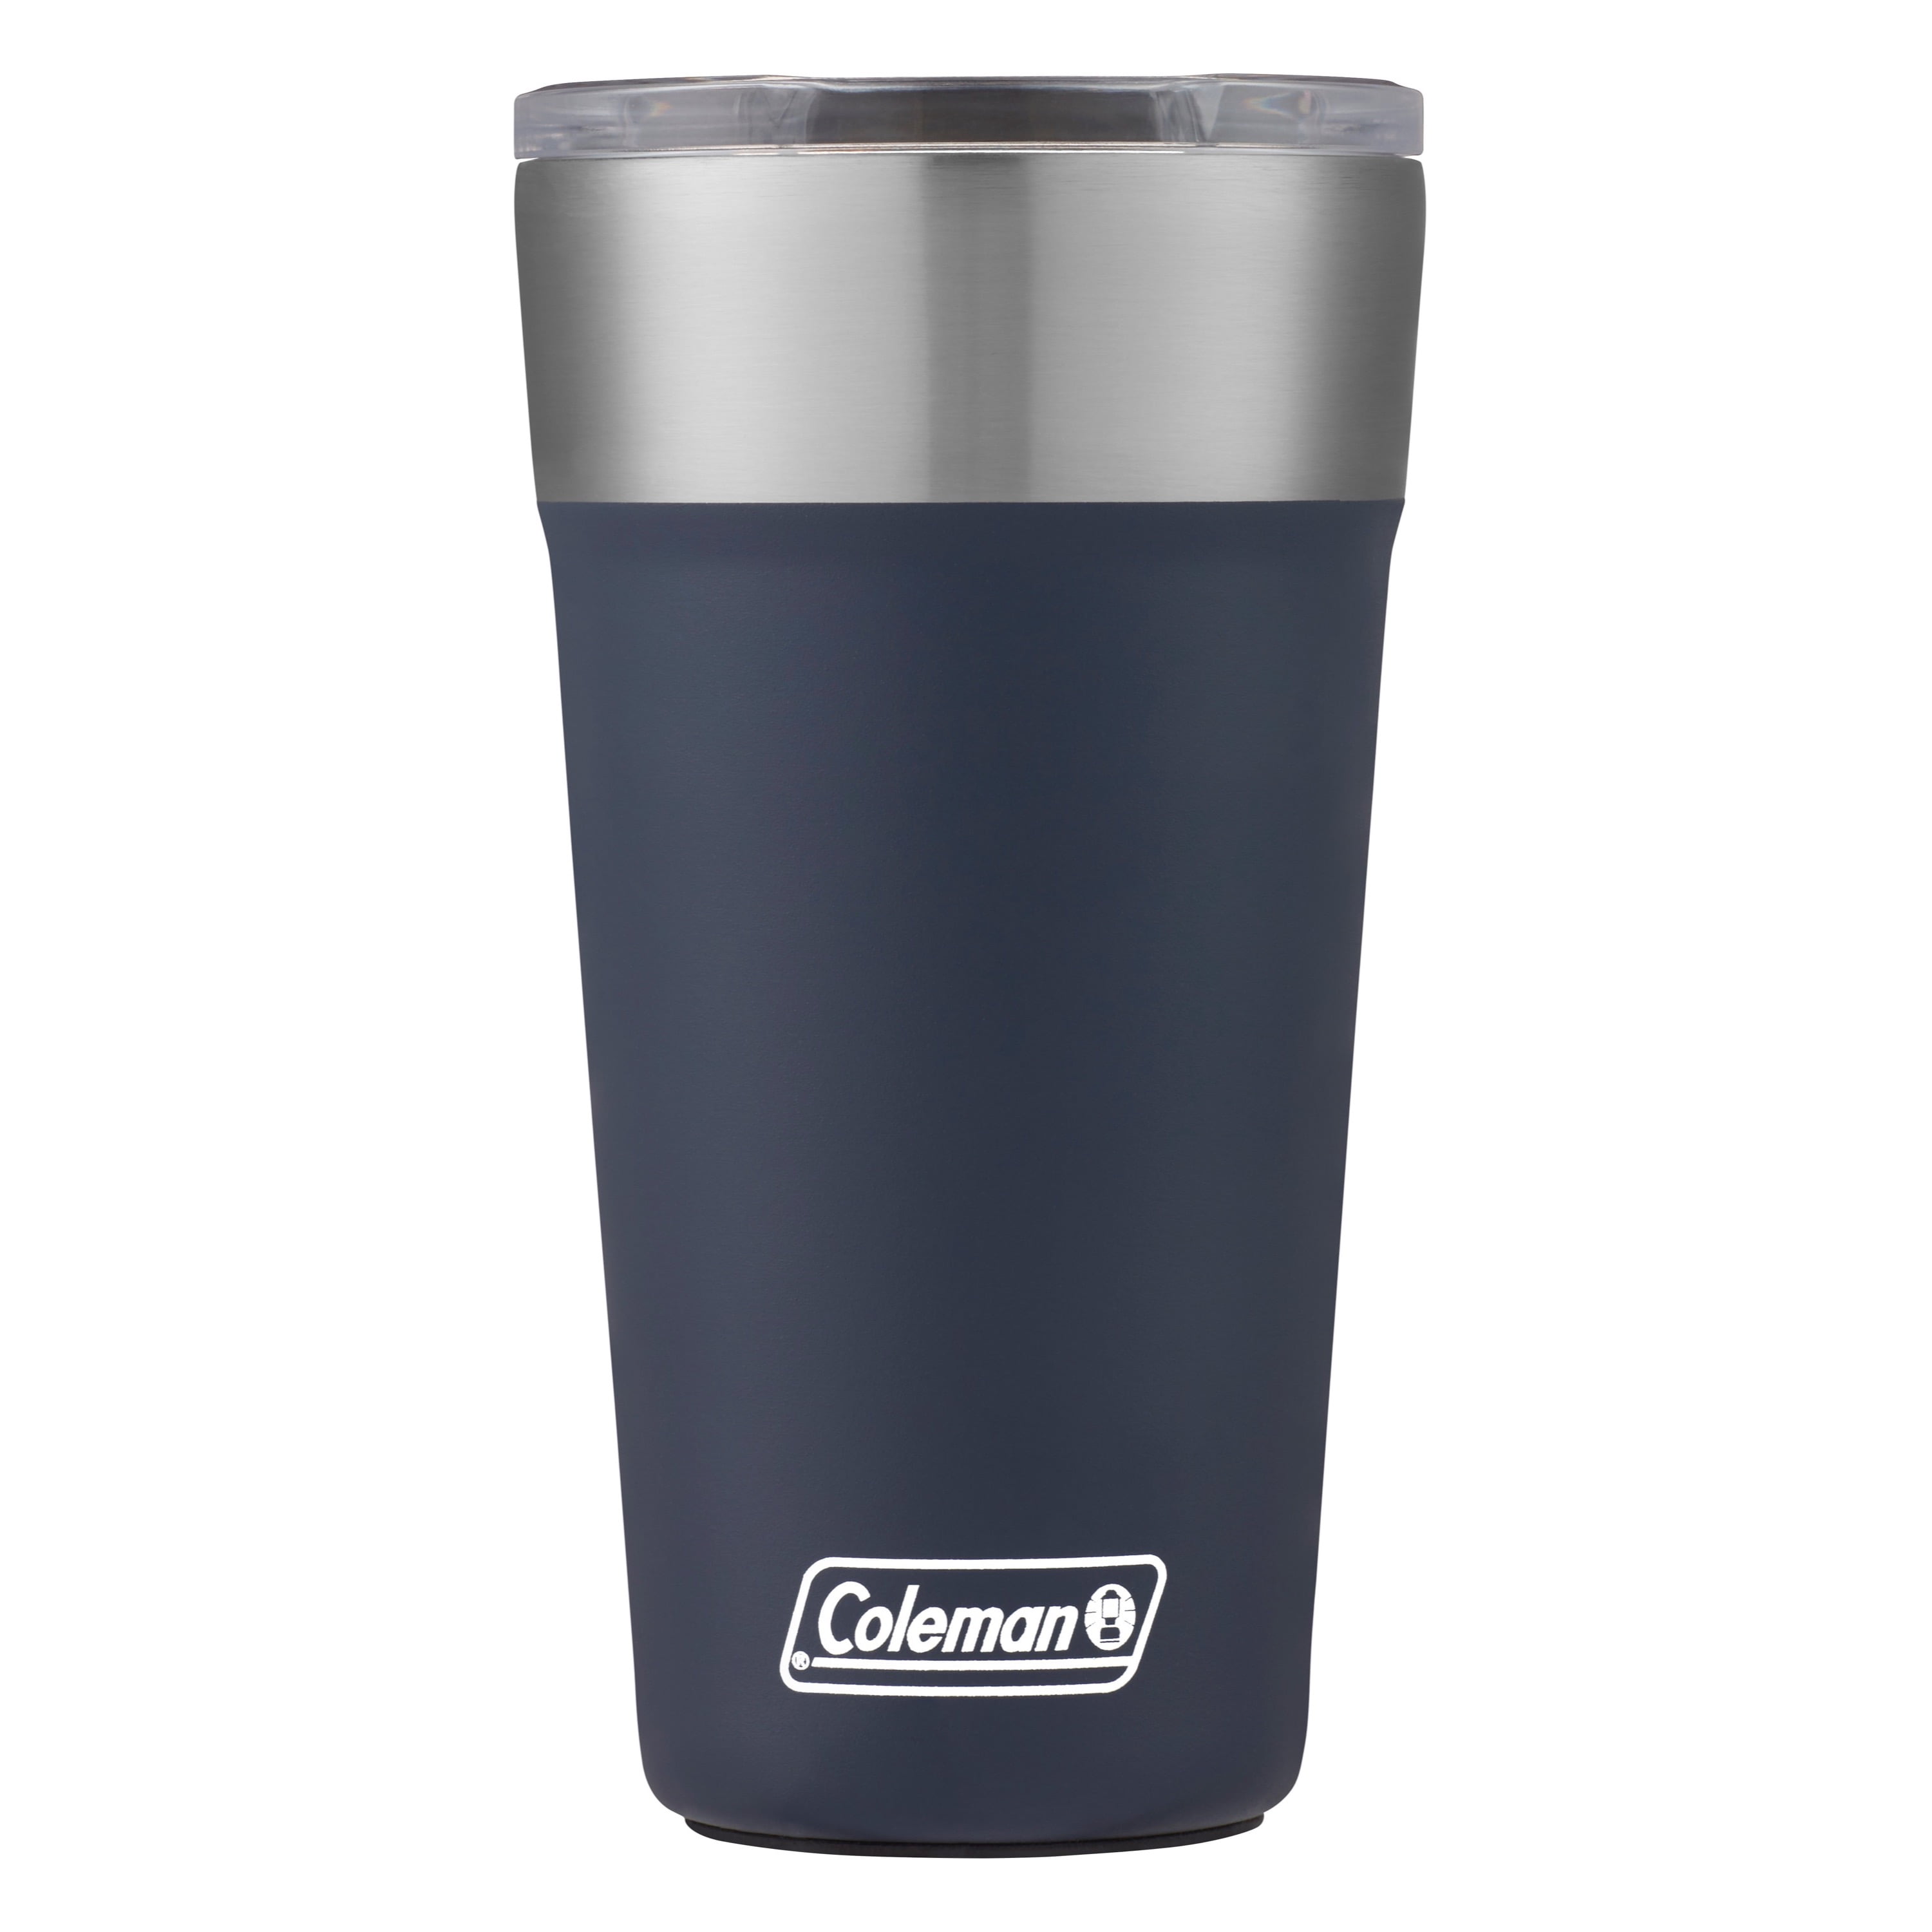 Hot/Cold Tumbler – Home Brew Coffee Co.